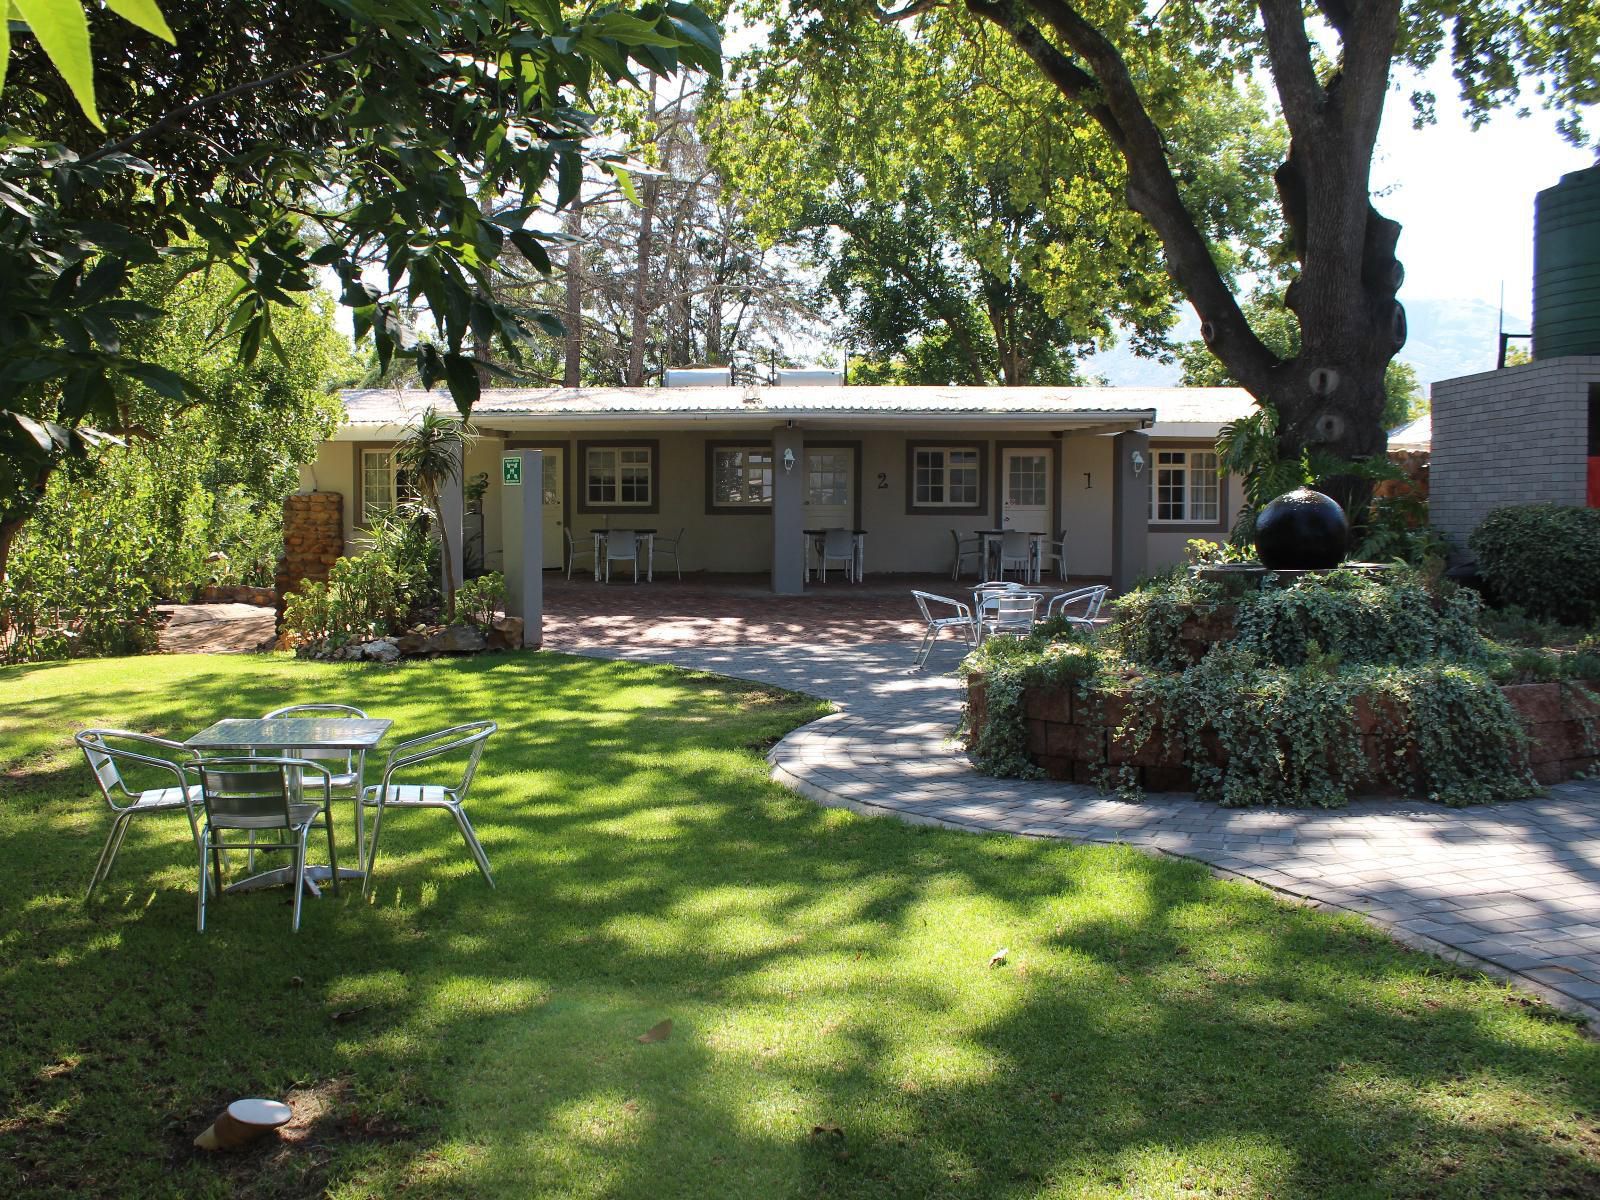 Nuwerus Lodge Paarl Western Cape South Africa House, Building, Architecture, Garden, Nature, Plant